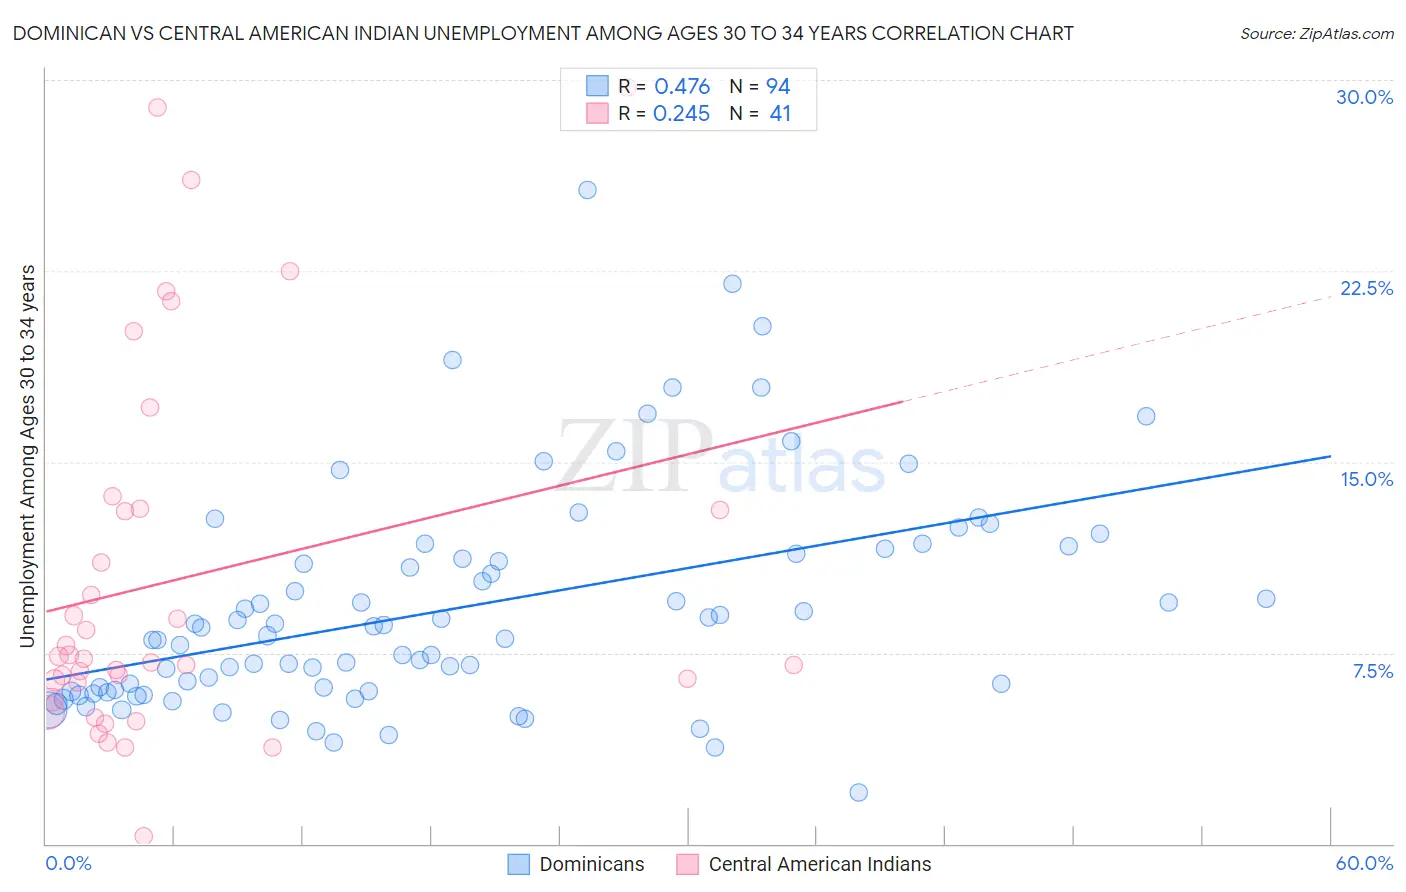 Dominican vs Central American Indian Unemployment Among Ages 30 to 34 years